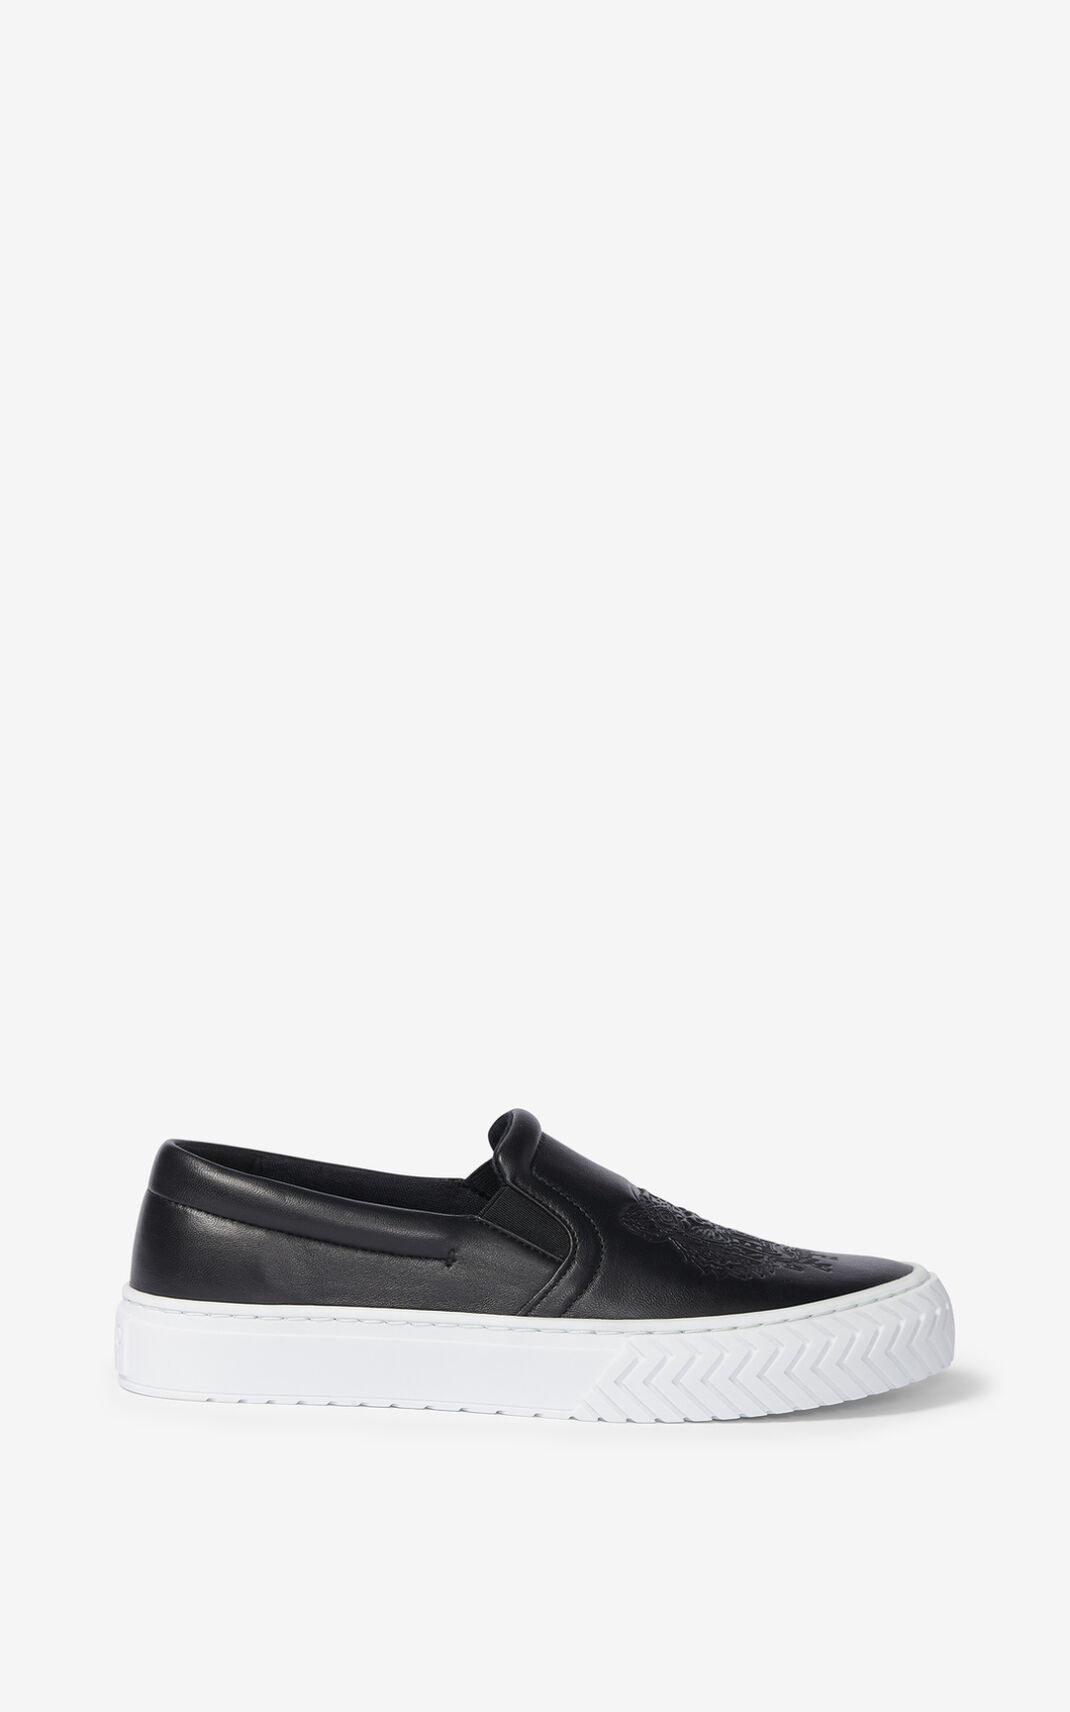 Tenis Kenzo K Skate Cuero without laces Mujer Negras - SKU.8463580